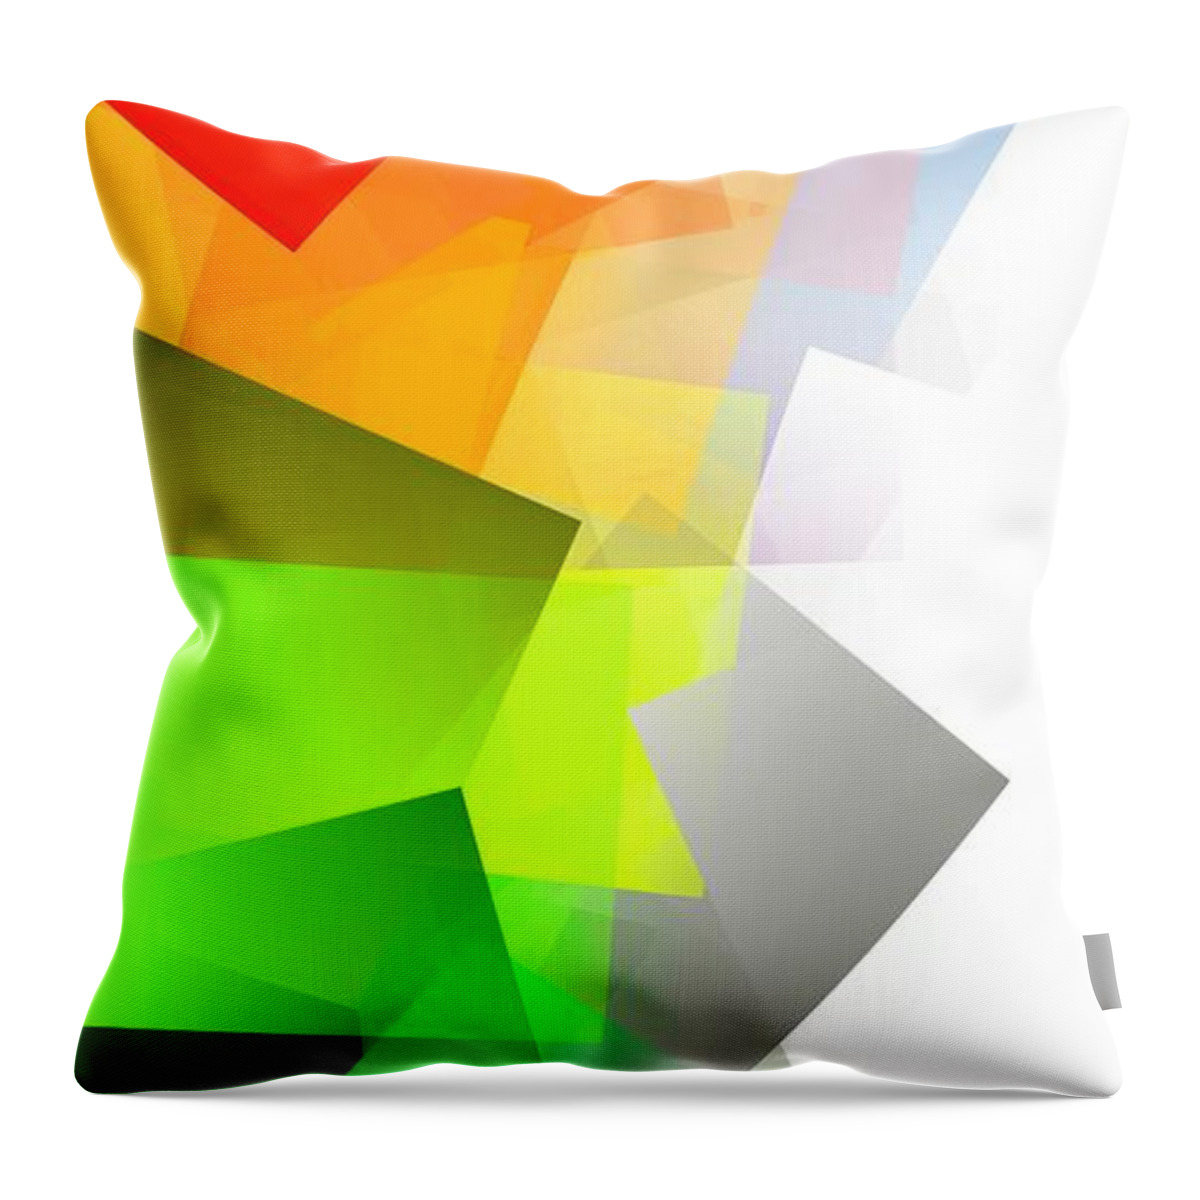 Abstract Throw Pillow featuring the digital art Simple Cubism Abstract 143 by Chris Butler